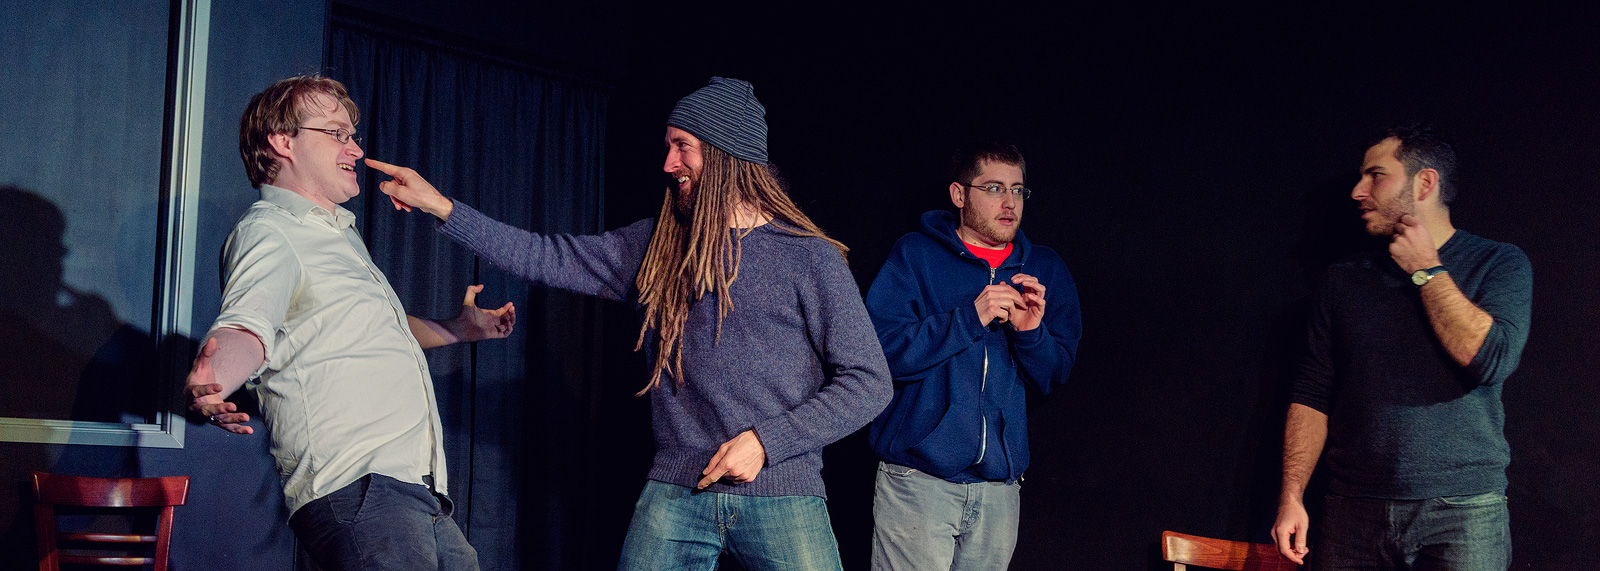 Improv Jam at Pointless Brewery and Theatre